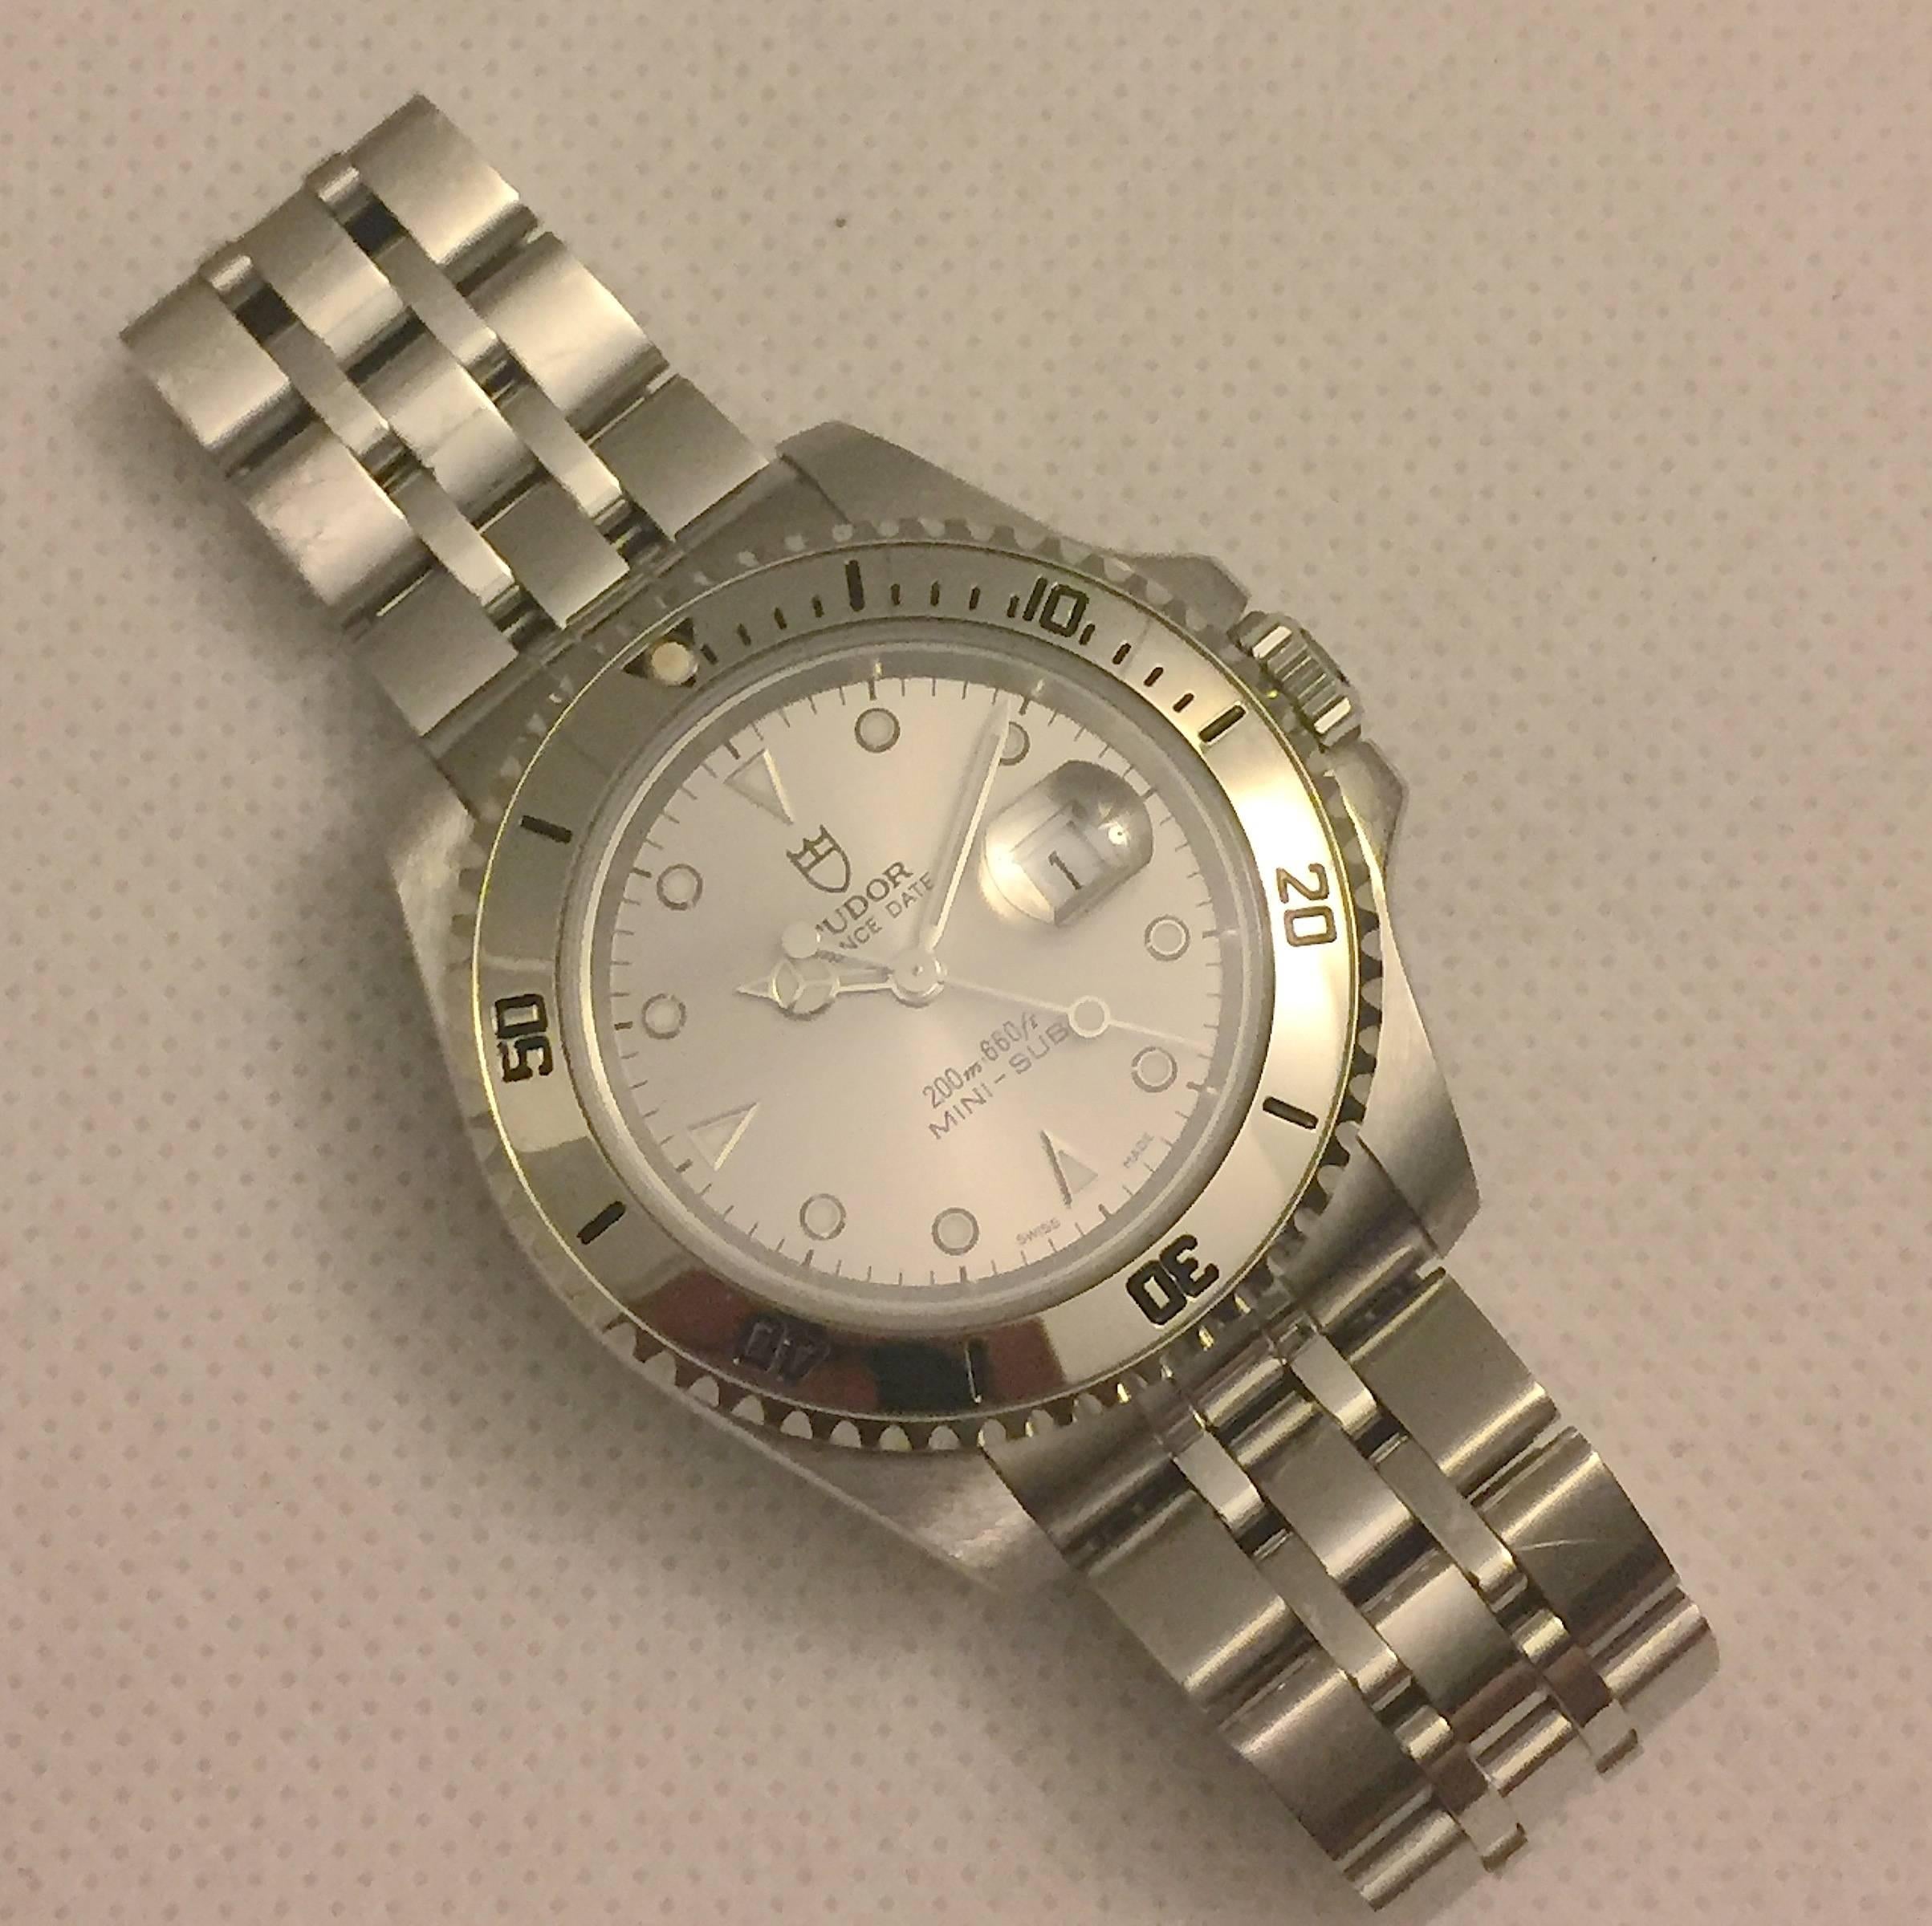 Tudor Prince Stainless Steel Mini Sub Automatic Wristwatch
Factory Metallic Silvered Dial with Applied Hour Markers
Uni-Directional Rotating Bezel
34mm in size 
Tudor Automatic Movement
Sapphire Crystal
Late 1990's Production
Fits Up To A 5.5